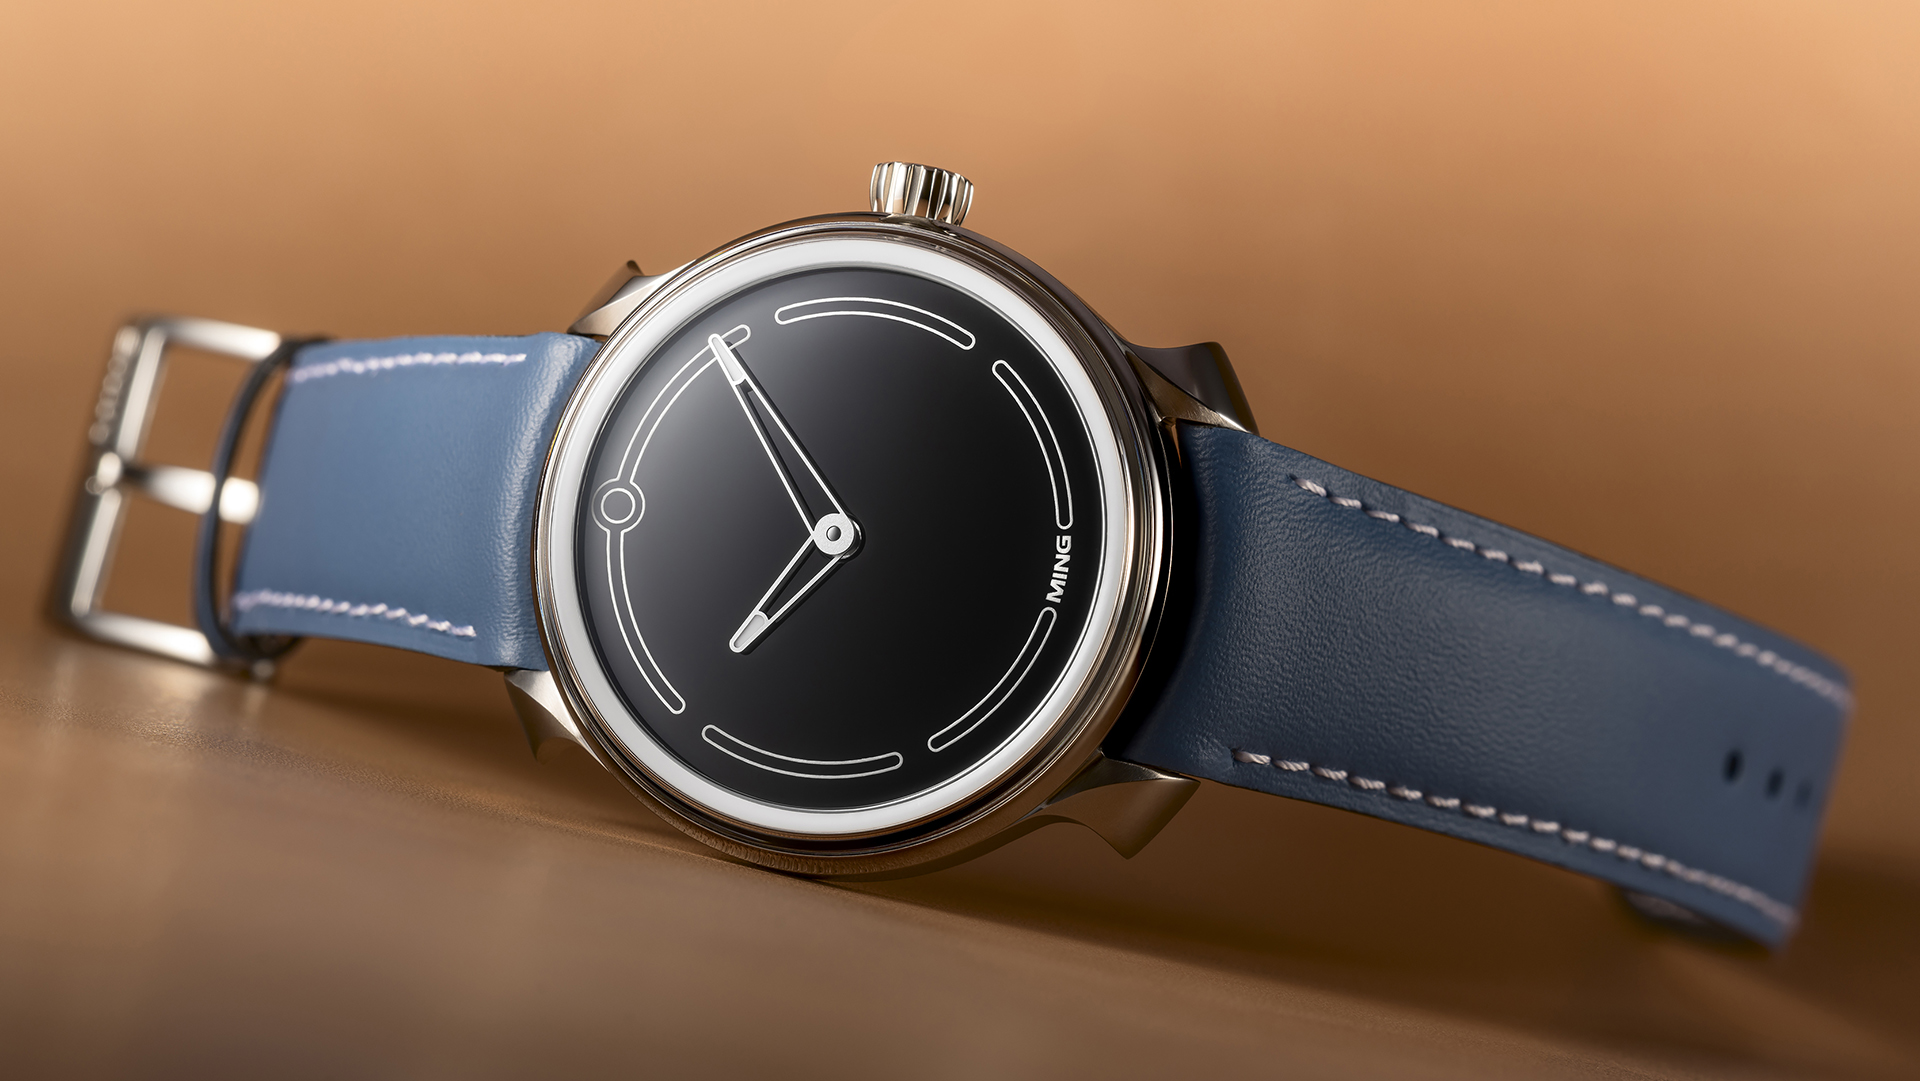 Ming Unveils Limited-Edition 19.05 Watch To Close Out 19 Series